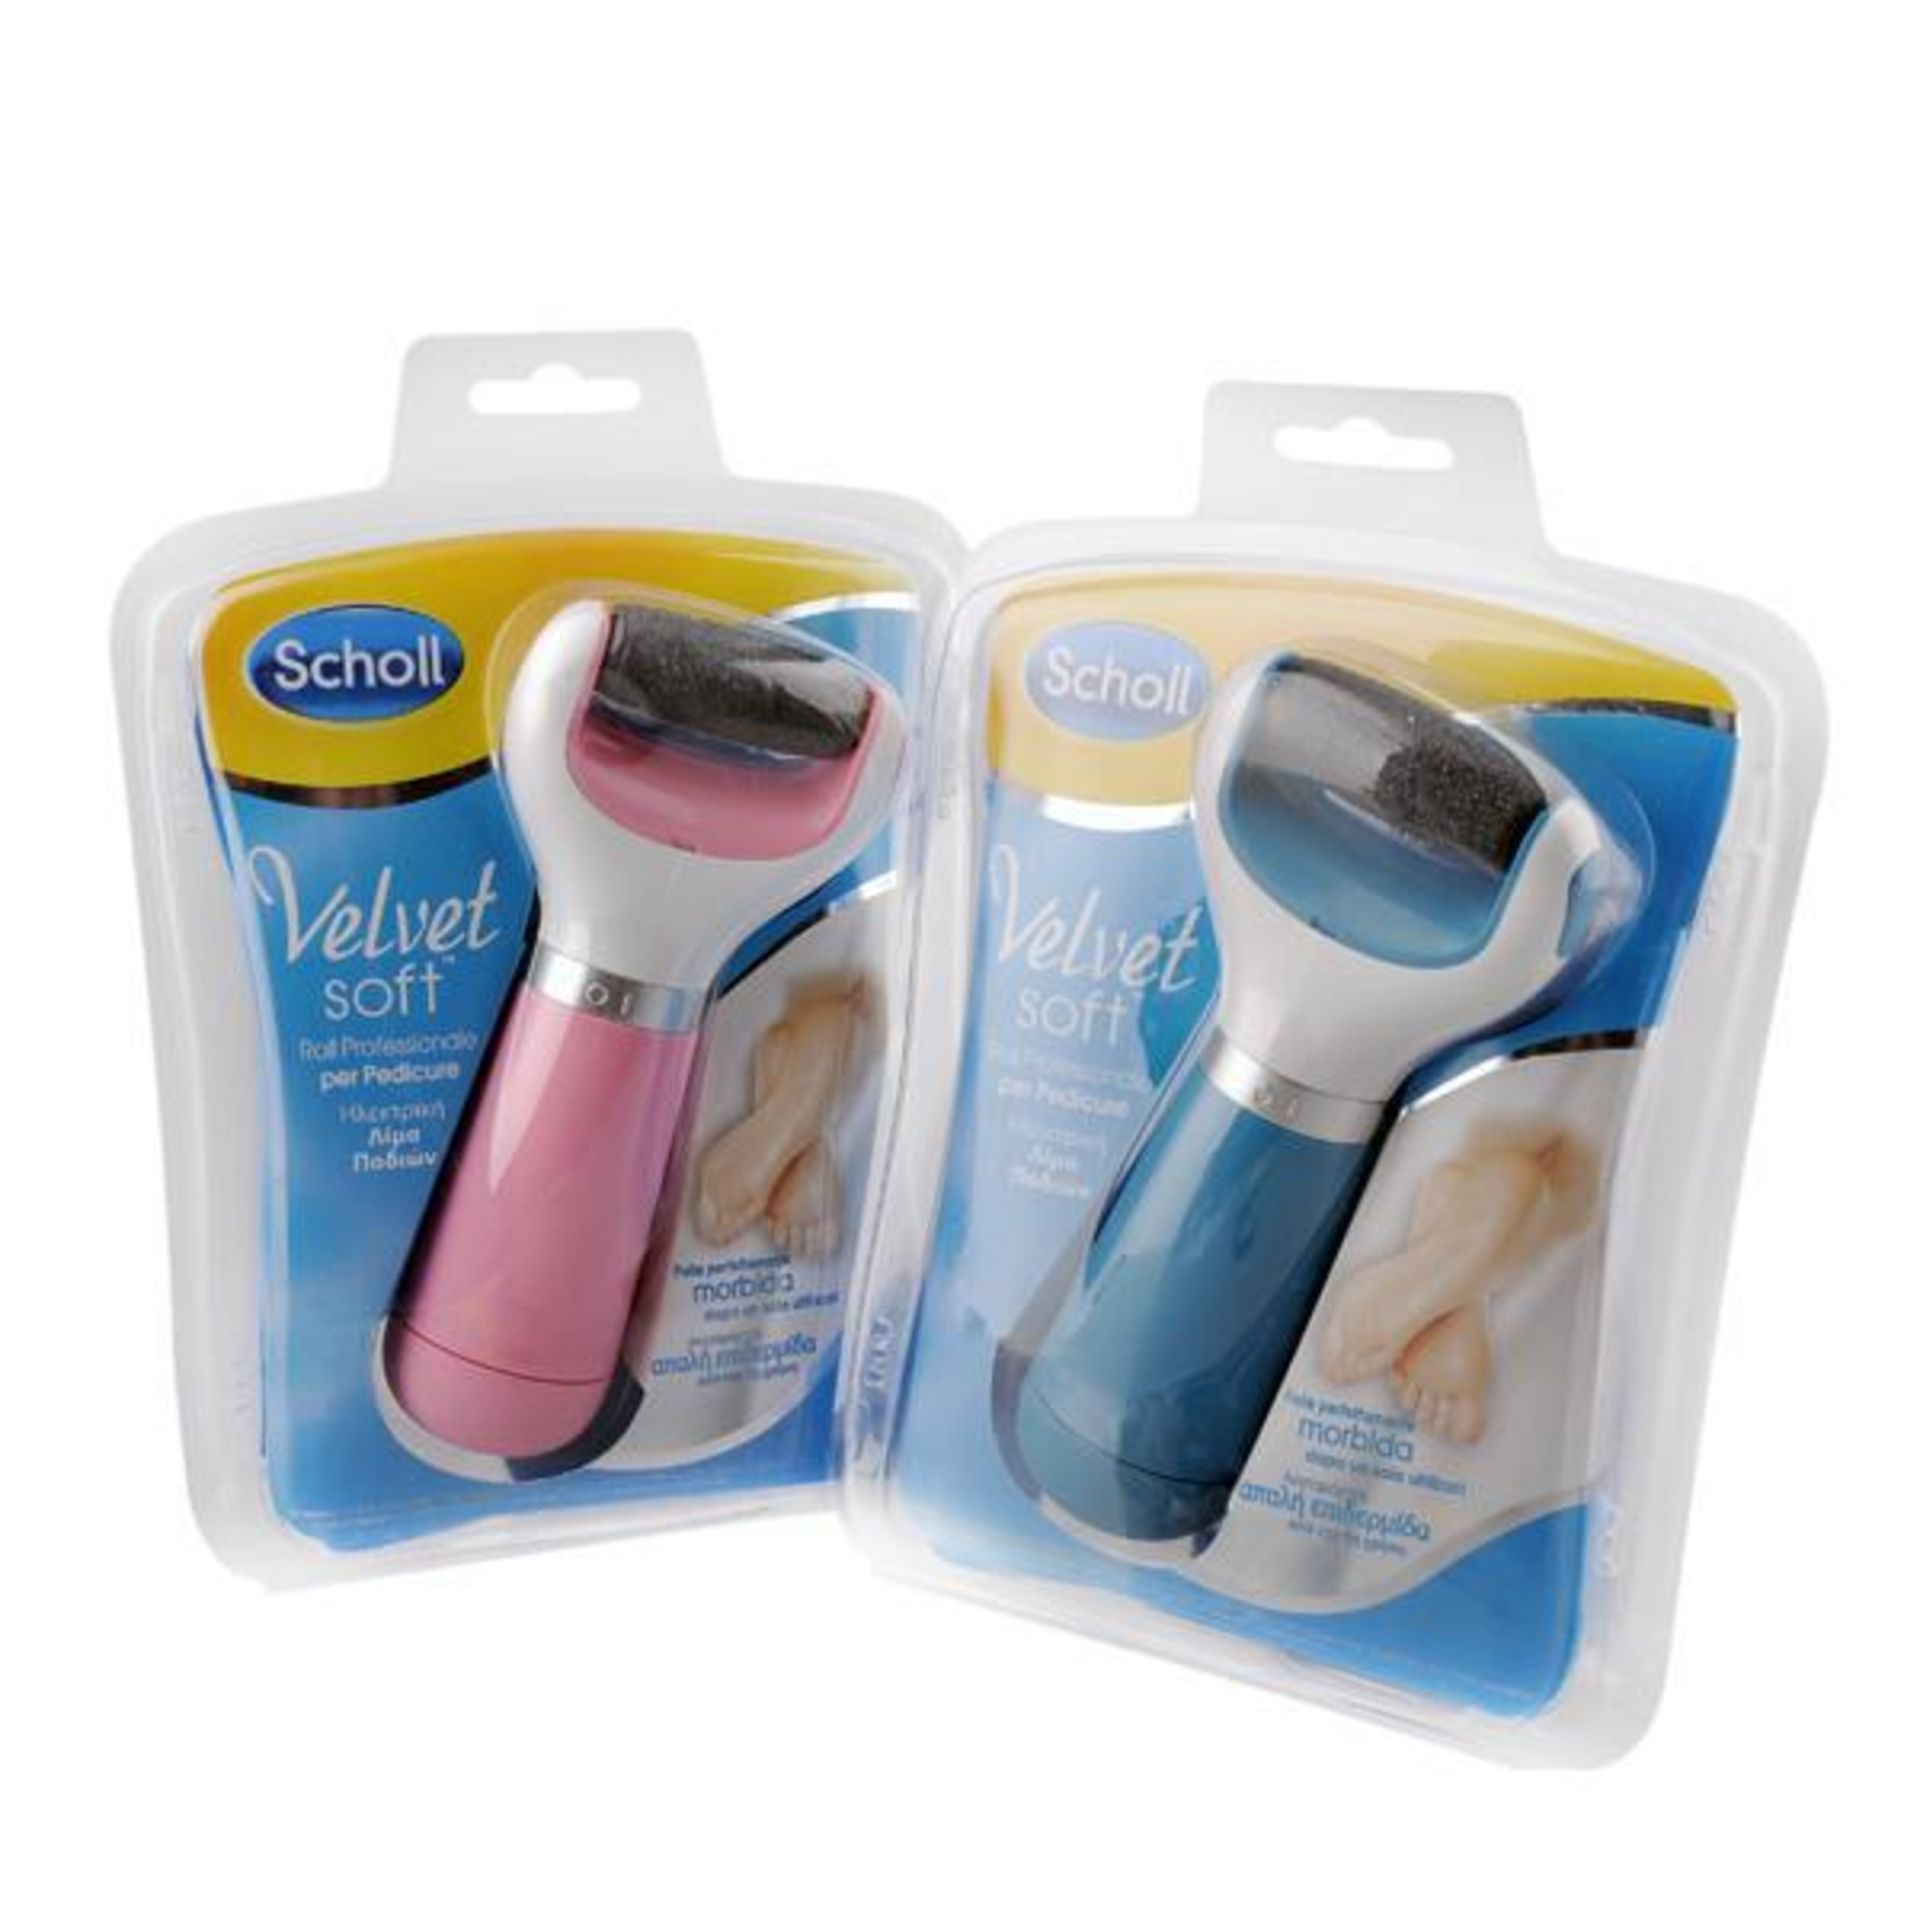 V Grade A Scholl Electronic Express Pedi Foot File Item Model Or Colour May Vary From Picture